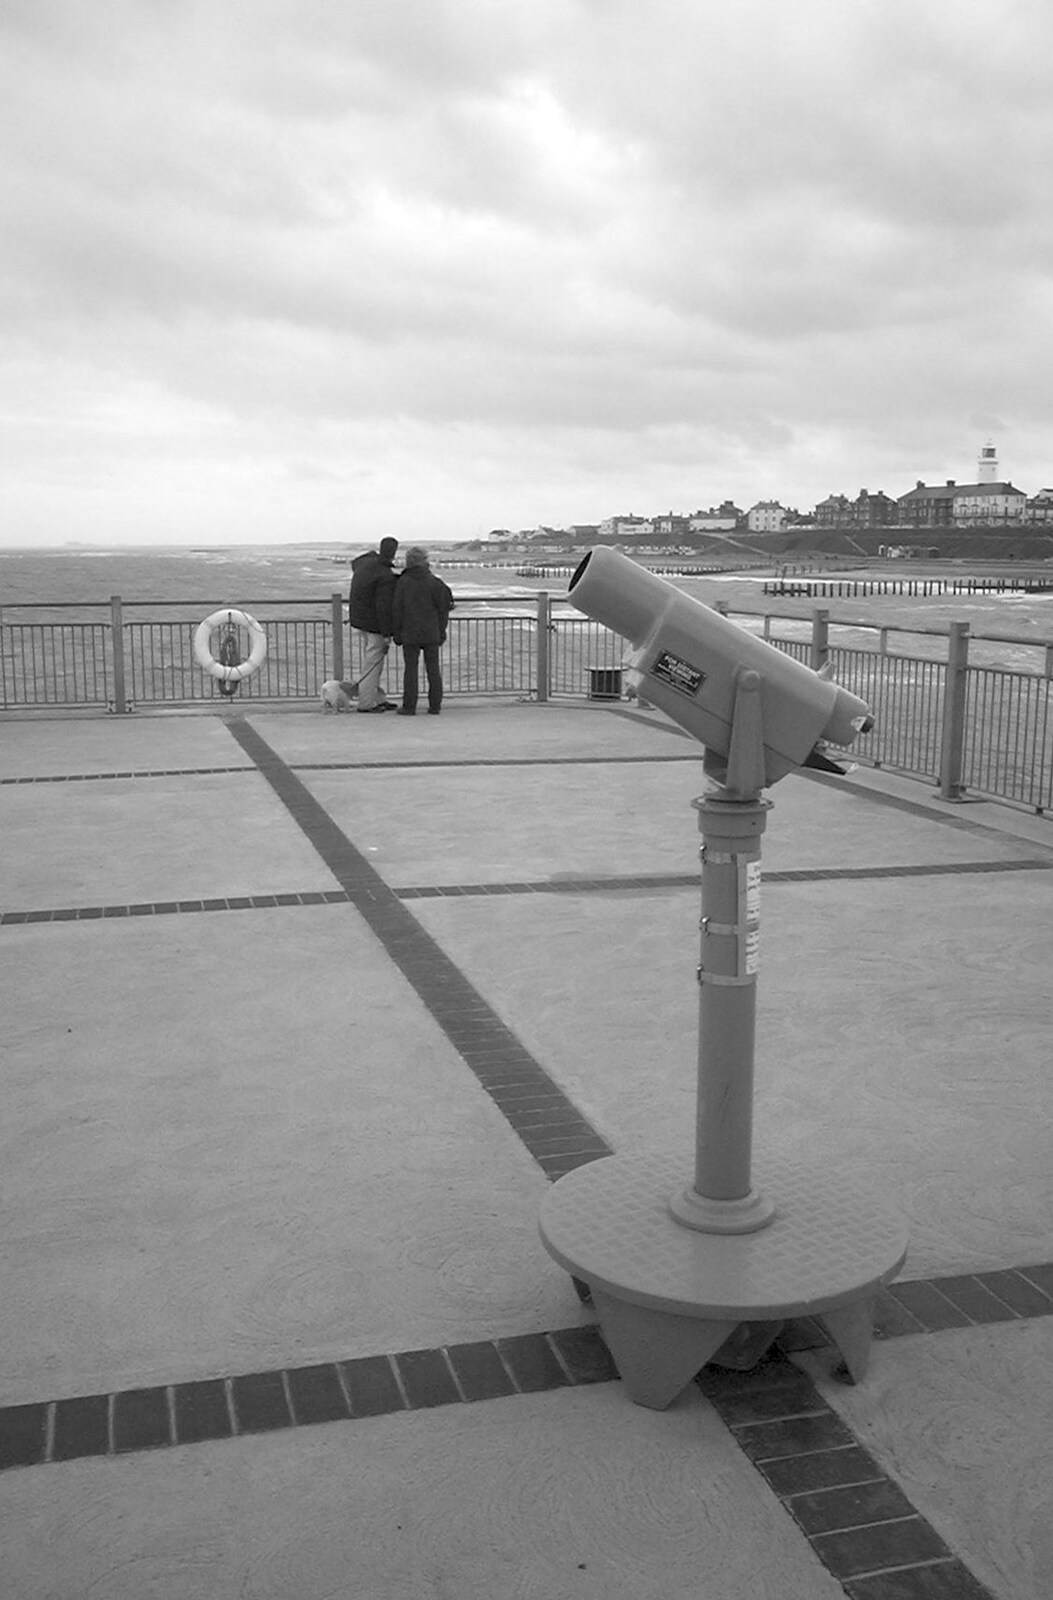 The telescope at the end of the pier from Moping in Southwold, Suffolk - 3rd April 2004